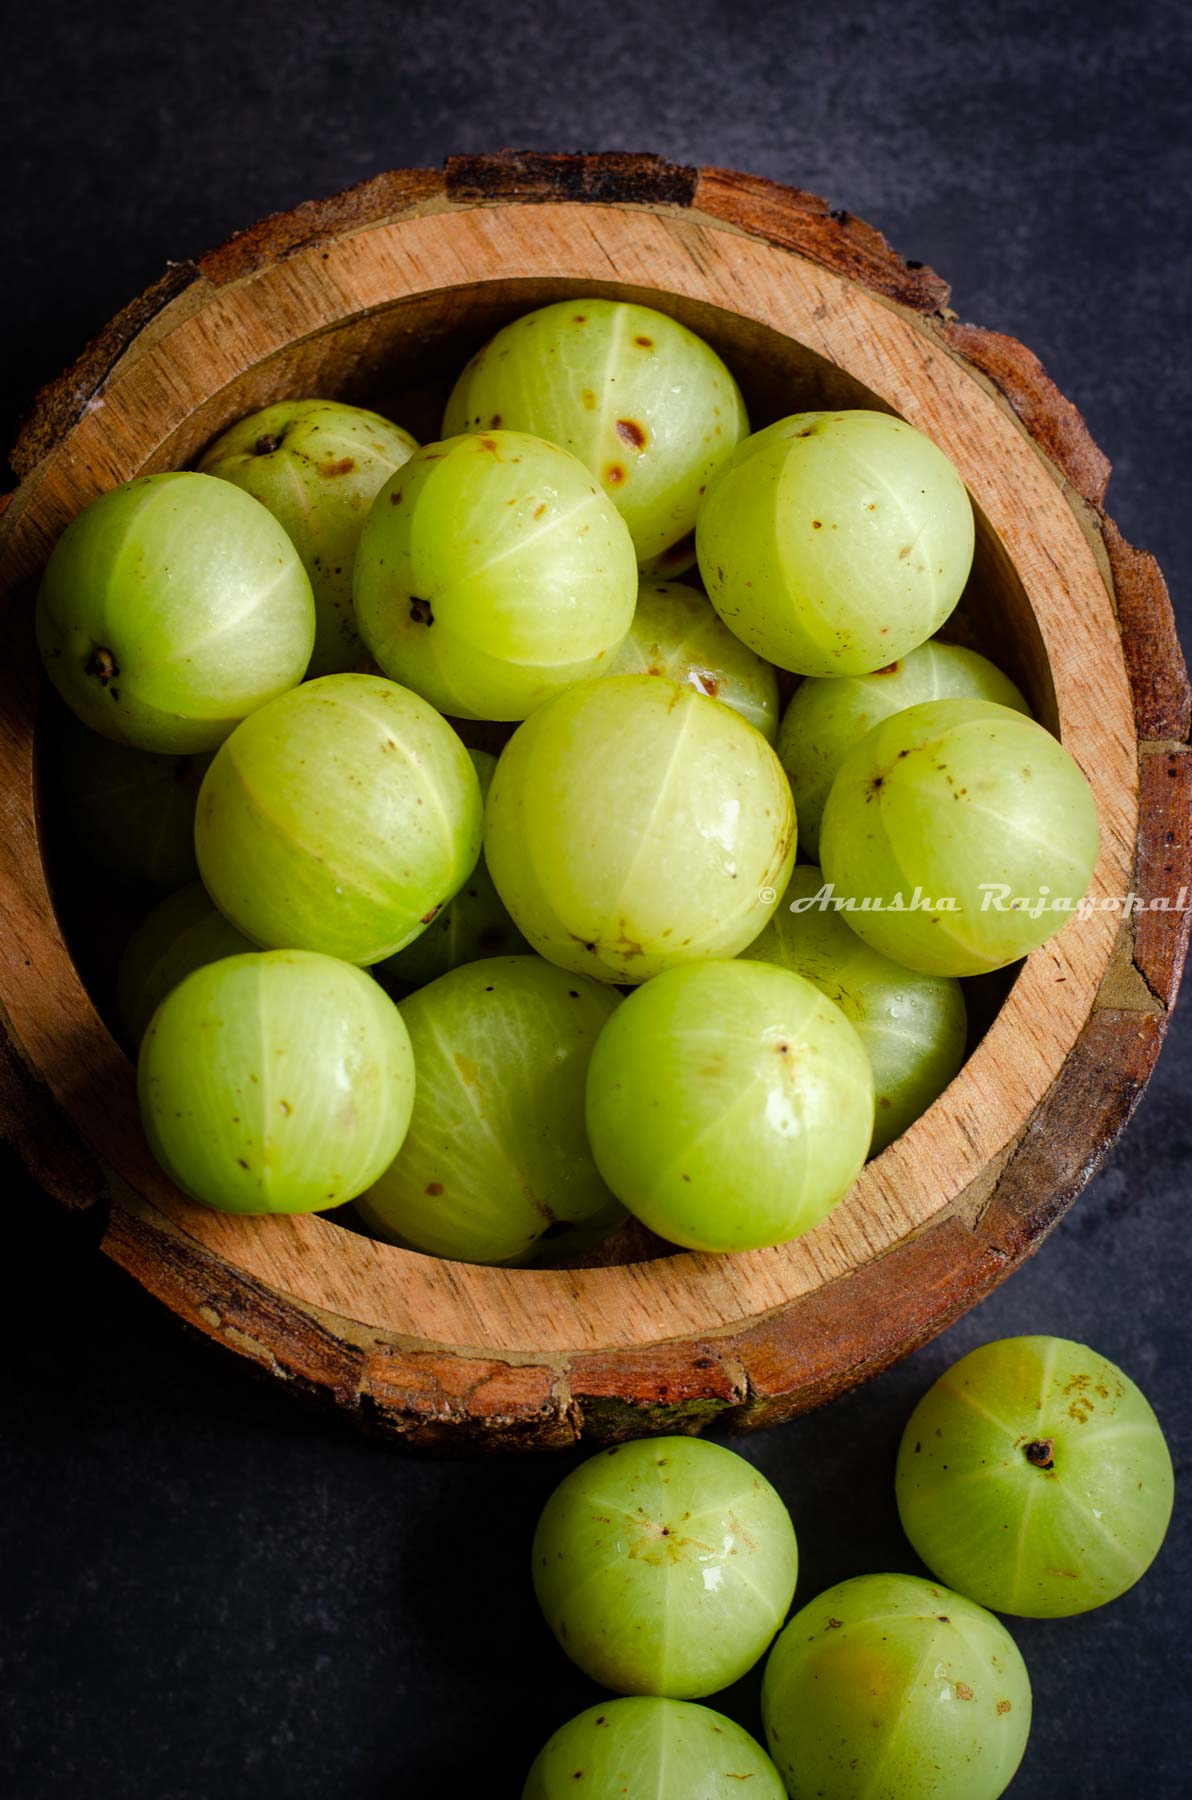 What is Amla?